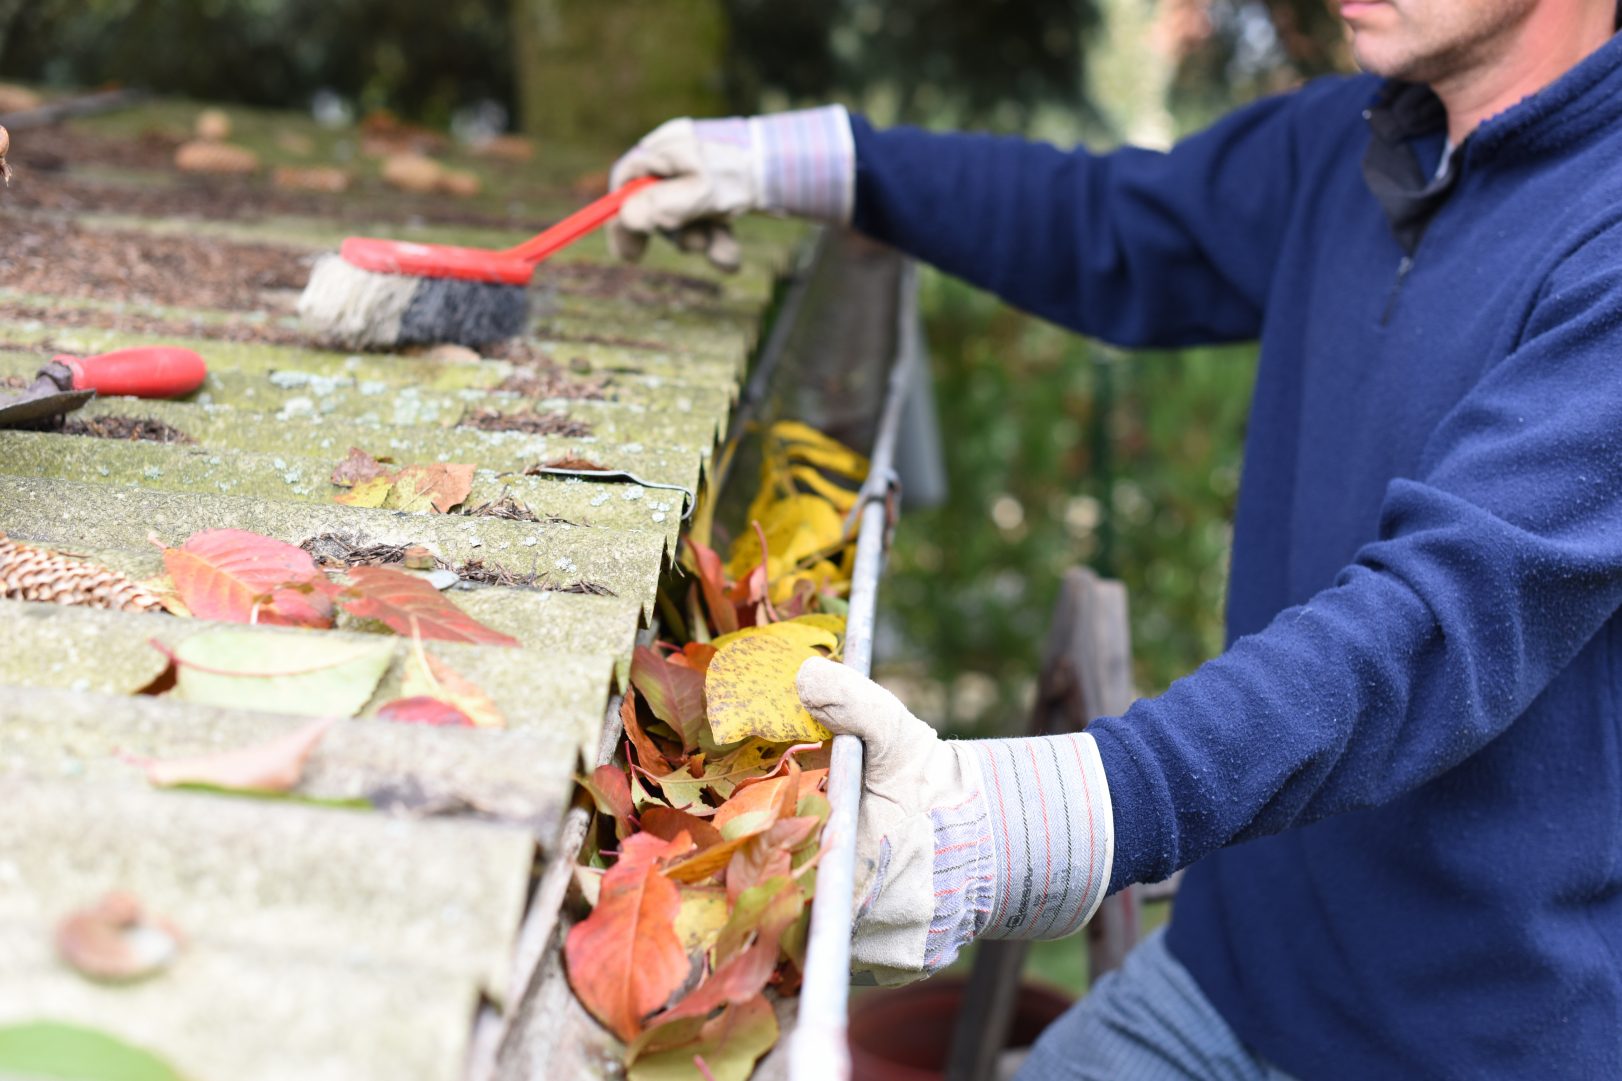 A person cleans out the gutters on the roof of a home while wearing white gloves and using a red brush.